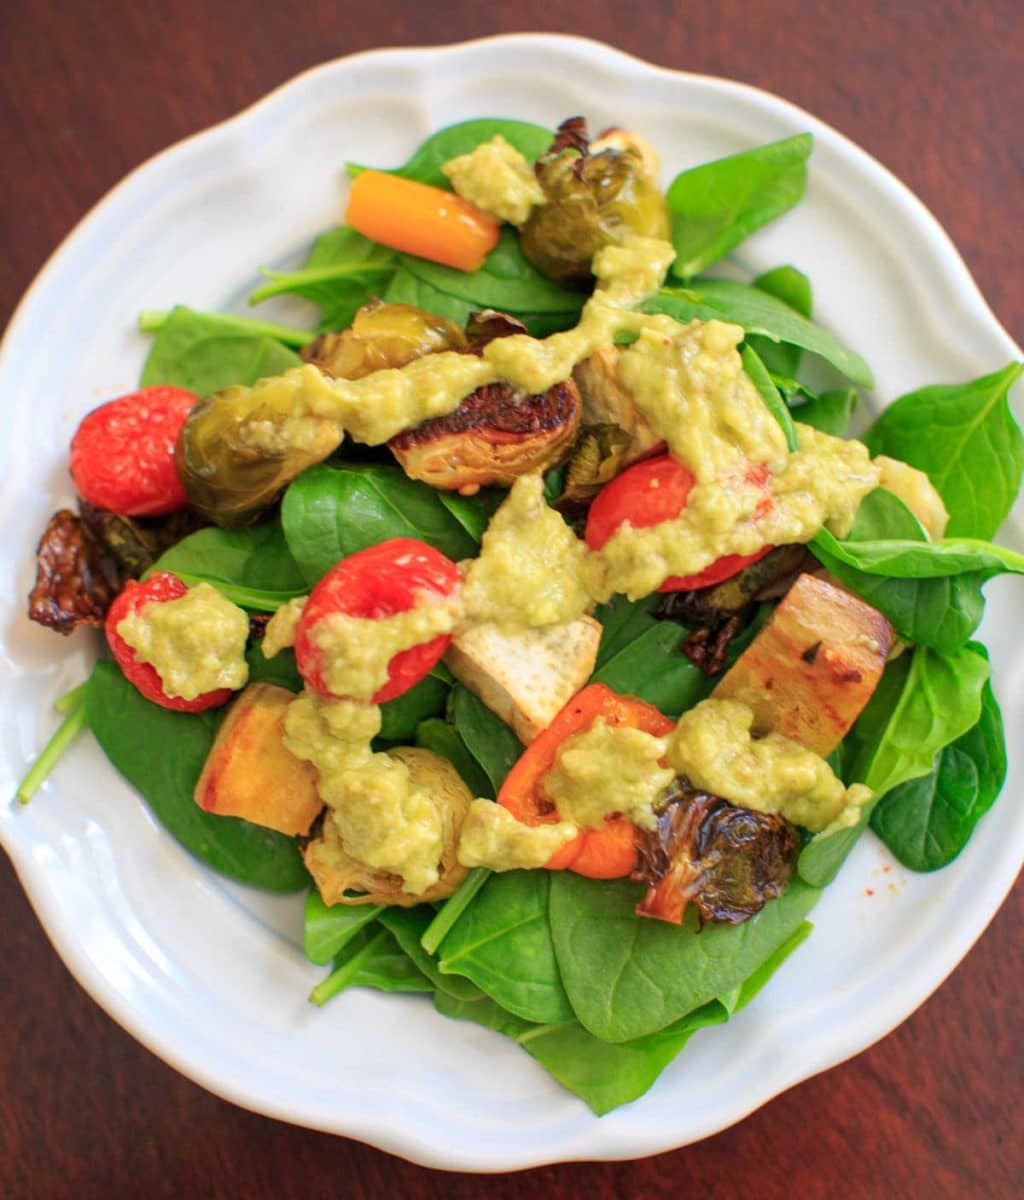 Roasted Vegetable Spinach Salad with Avocado Dressing, a.k.a. "Leftover Veggie Salad." Use up your vegetables or roast your favorites for this healthy vegan meal!